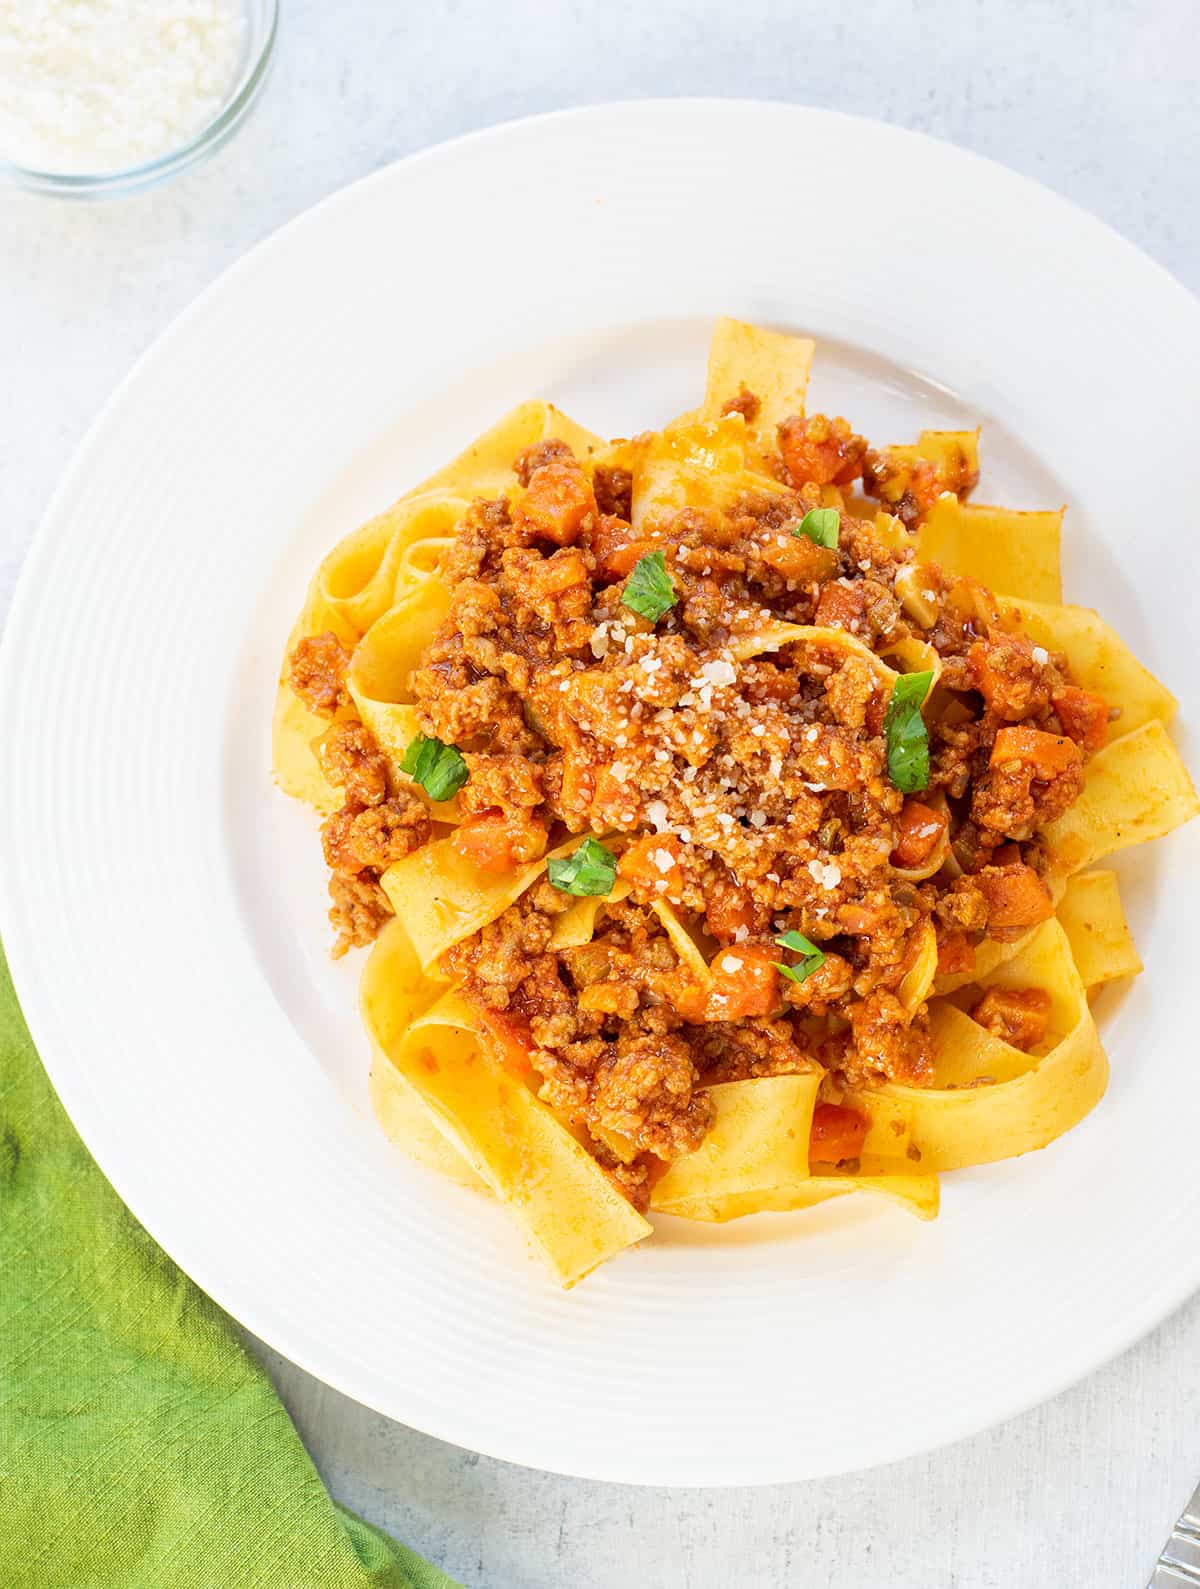 plate of beef bolognese over pasta garnished with basil